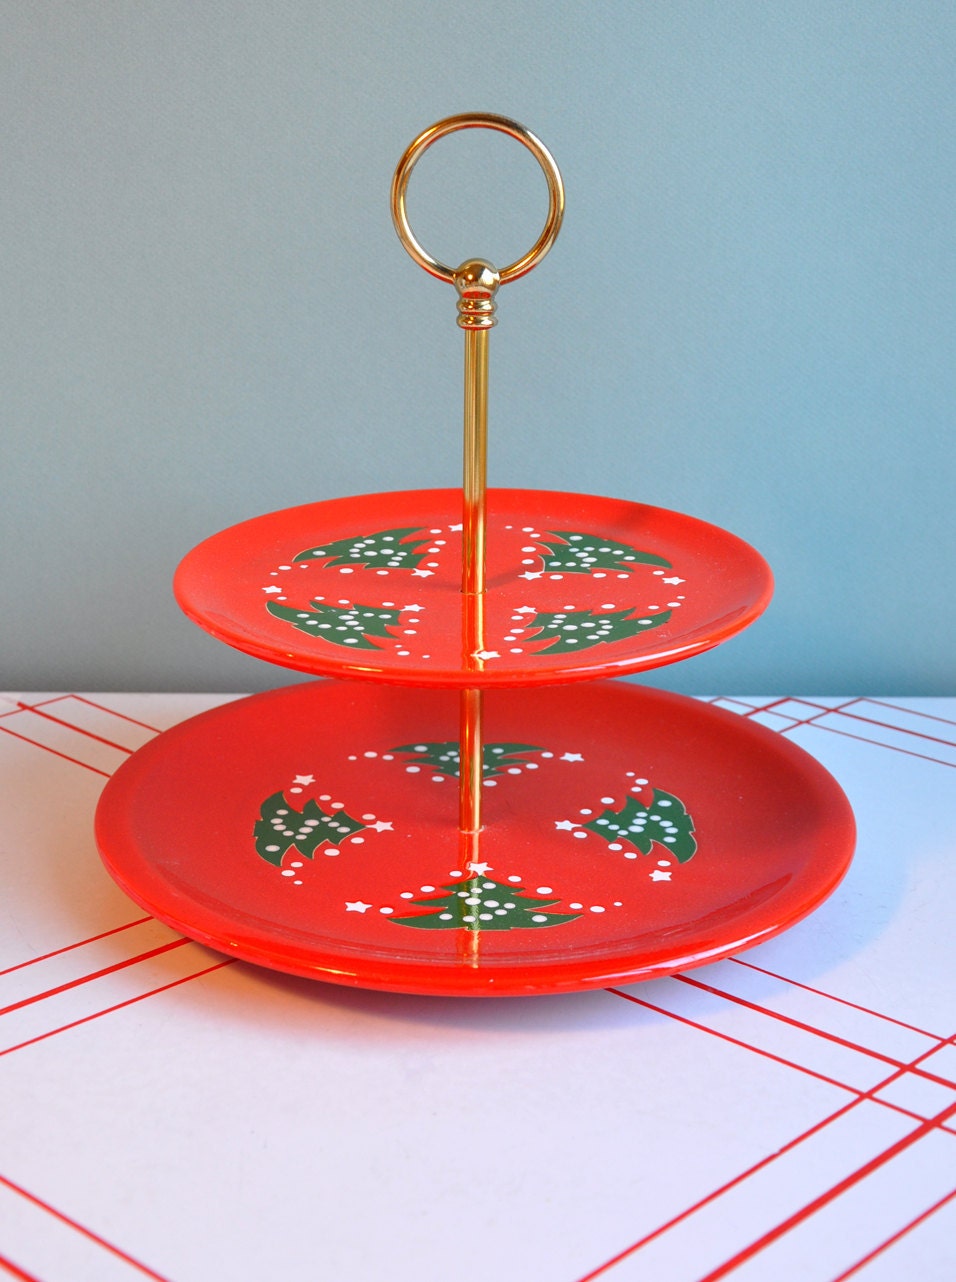 SALE 20% OFF Christmas Red Tiered Plate Stand by Waechtersbach Germany